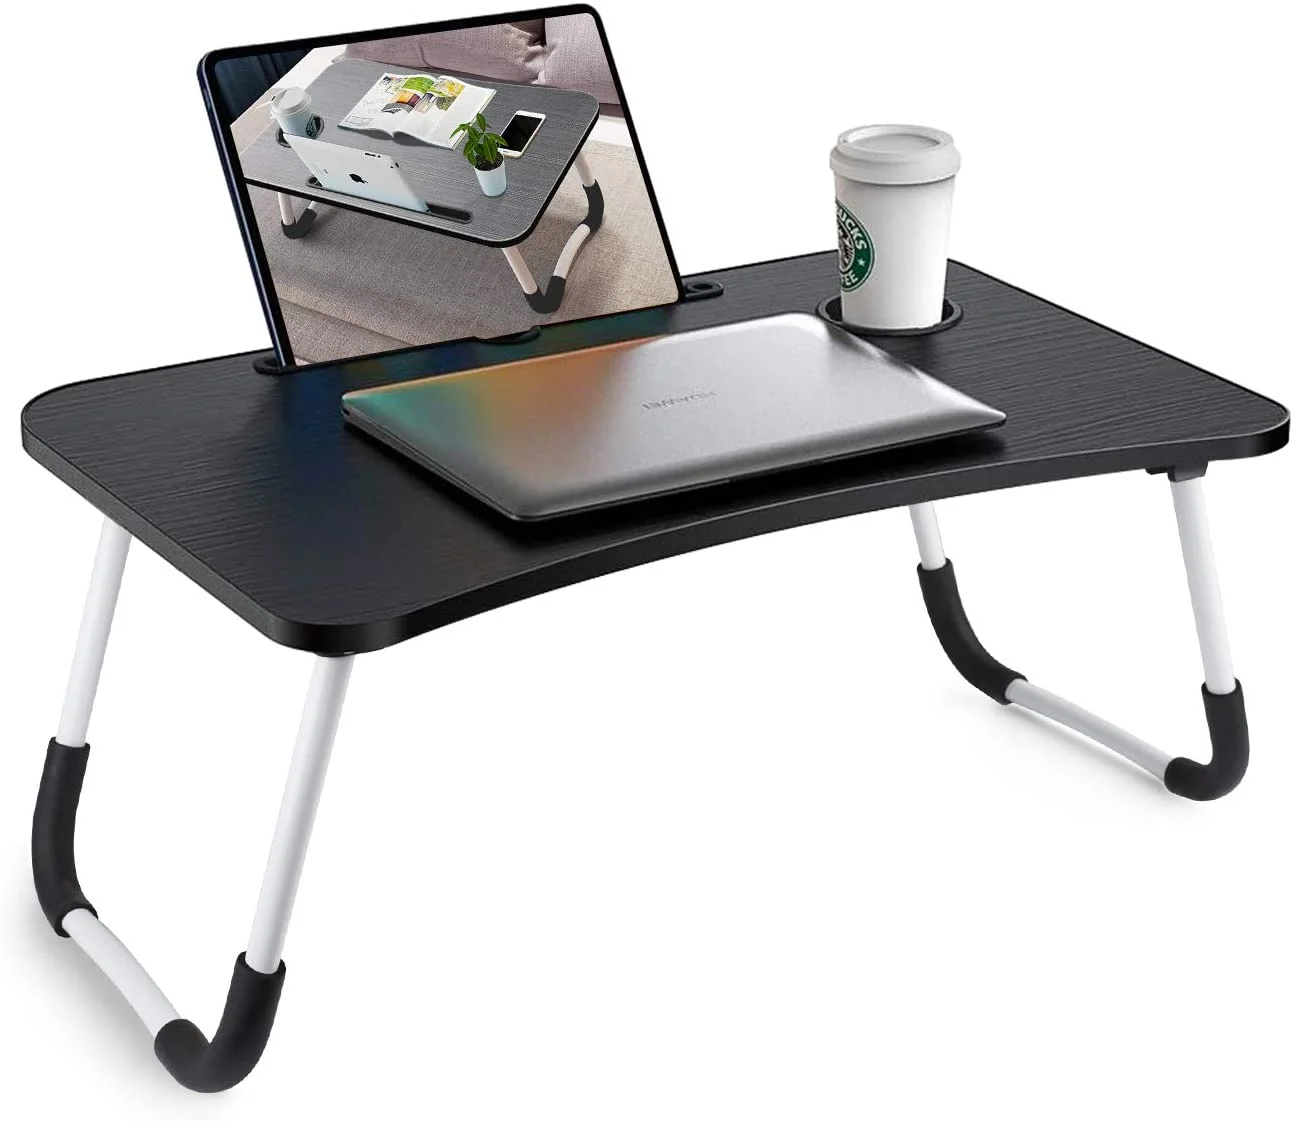 Color : B 60x40x28cm Laptop Desk Tray Folding Table Small Table On The Bed Folding Laptop Lazy Table Student Bedroom Desk Dormitory Artifact Function Table